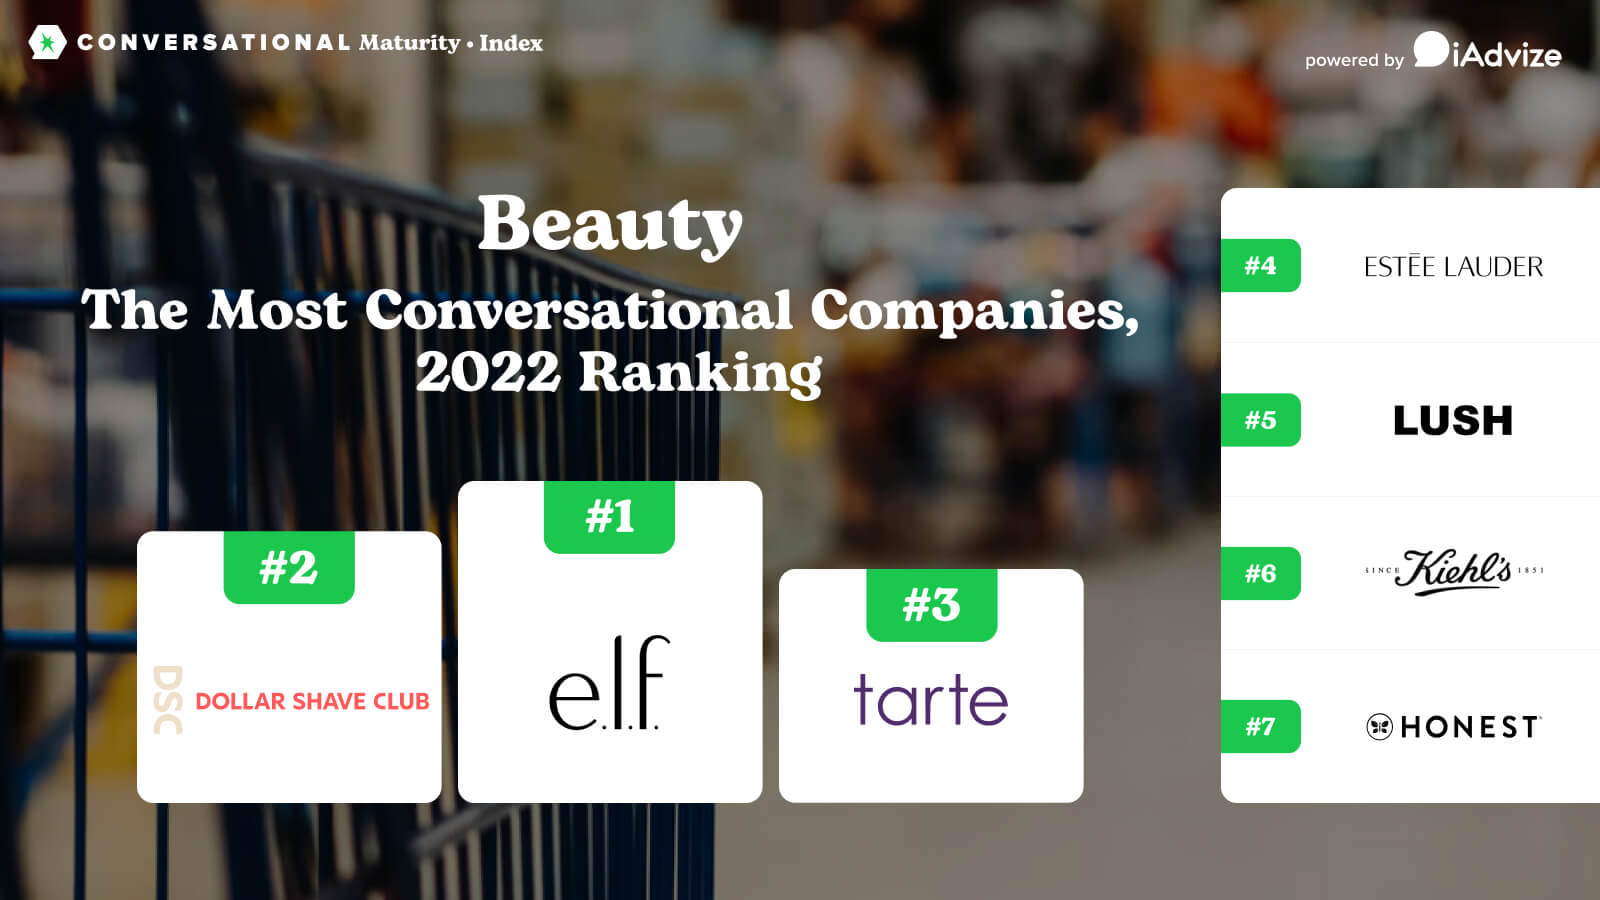  Featured image: Conversational maturity index for beauty brands - Read full post: Conversational Maturity Index: Beauty 2022 Ranking